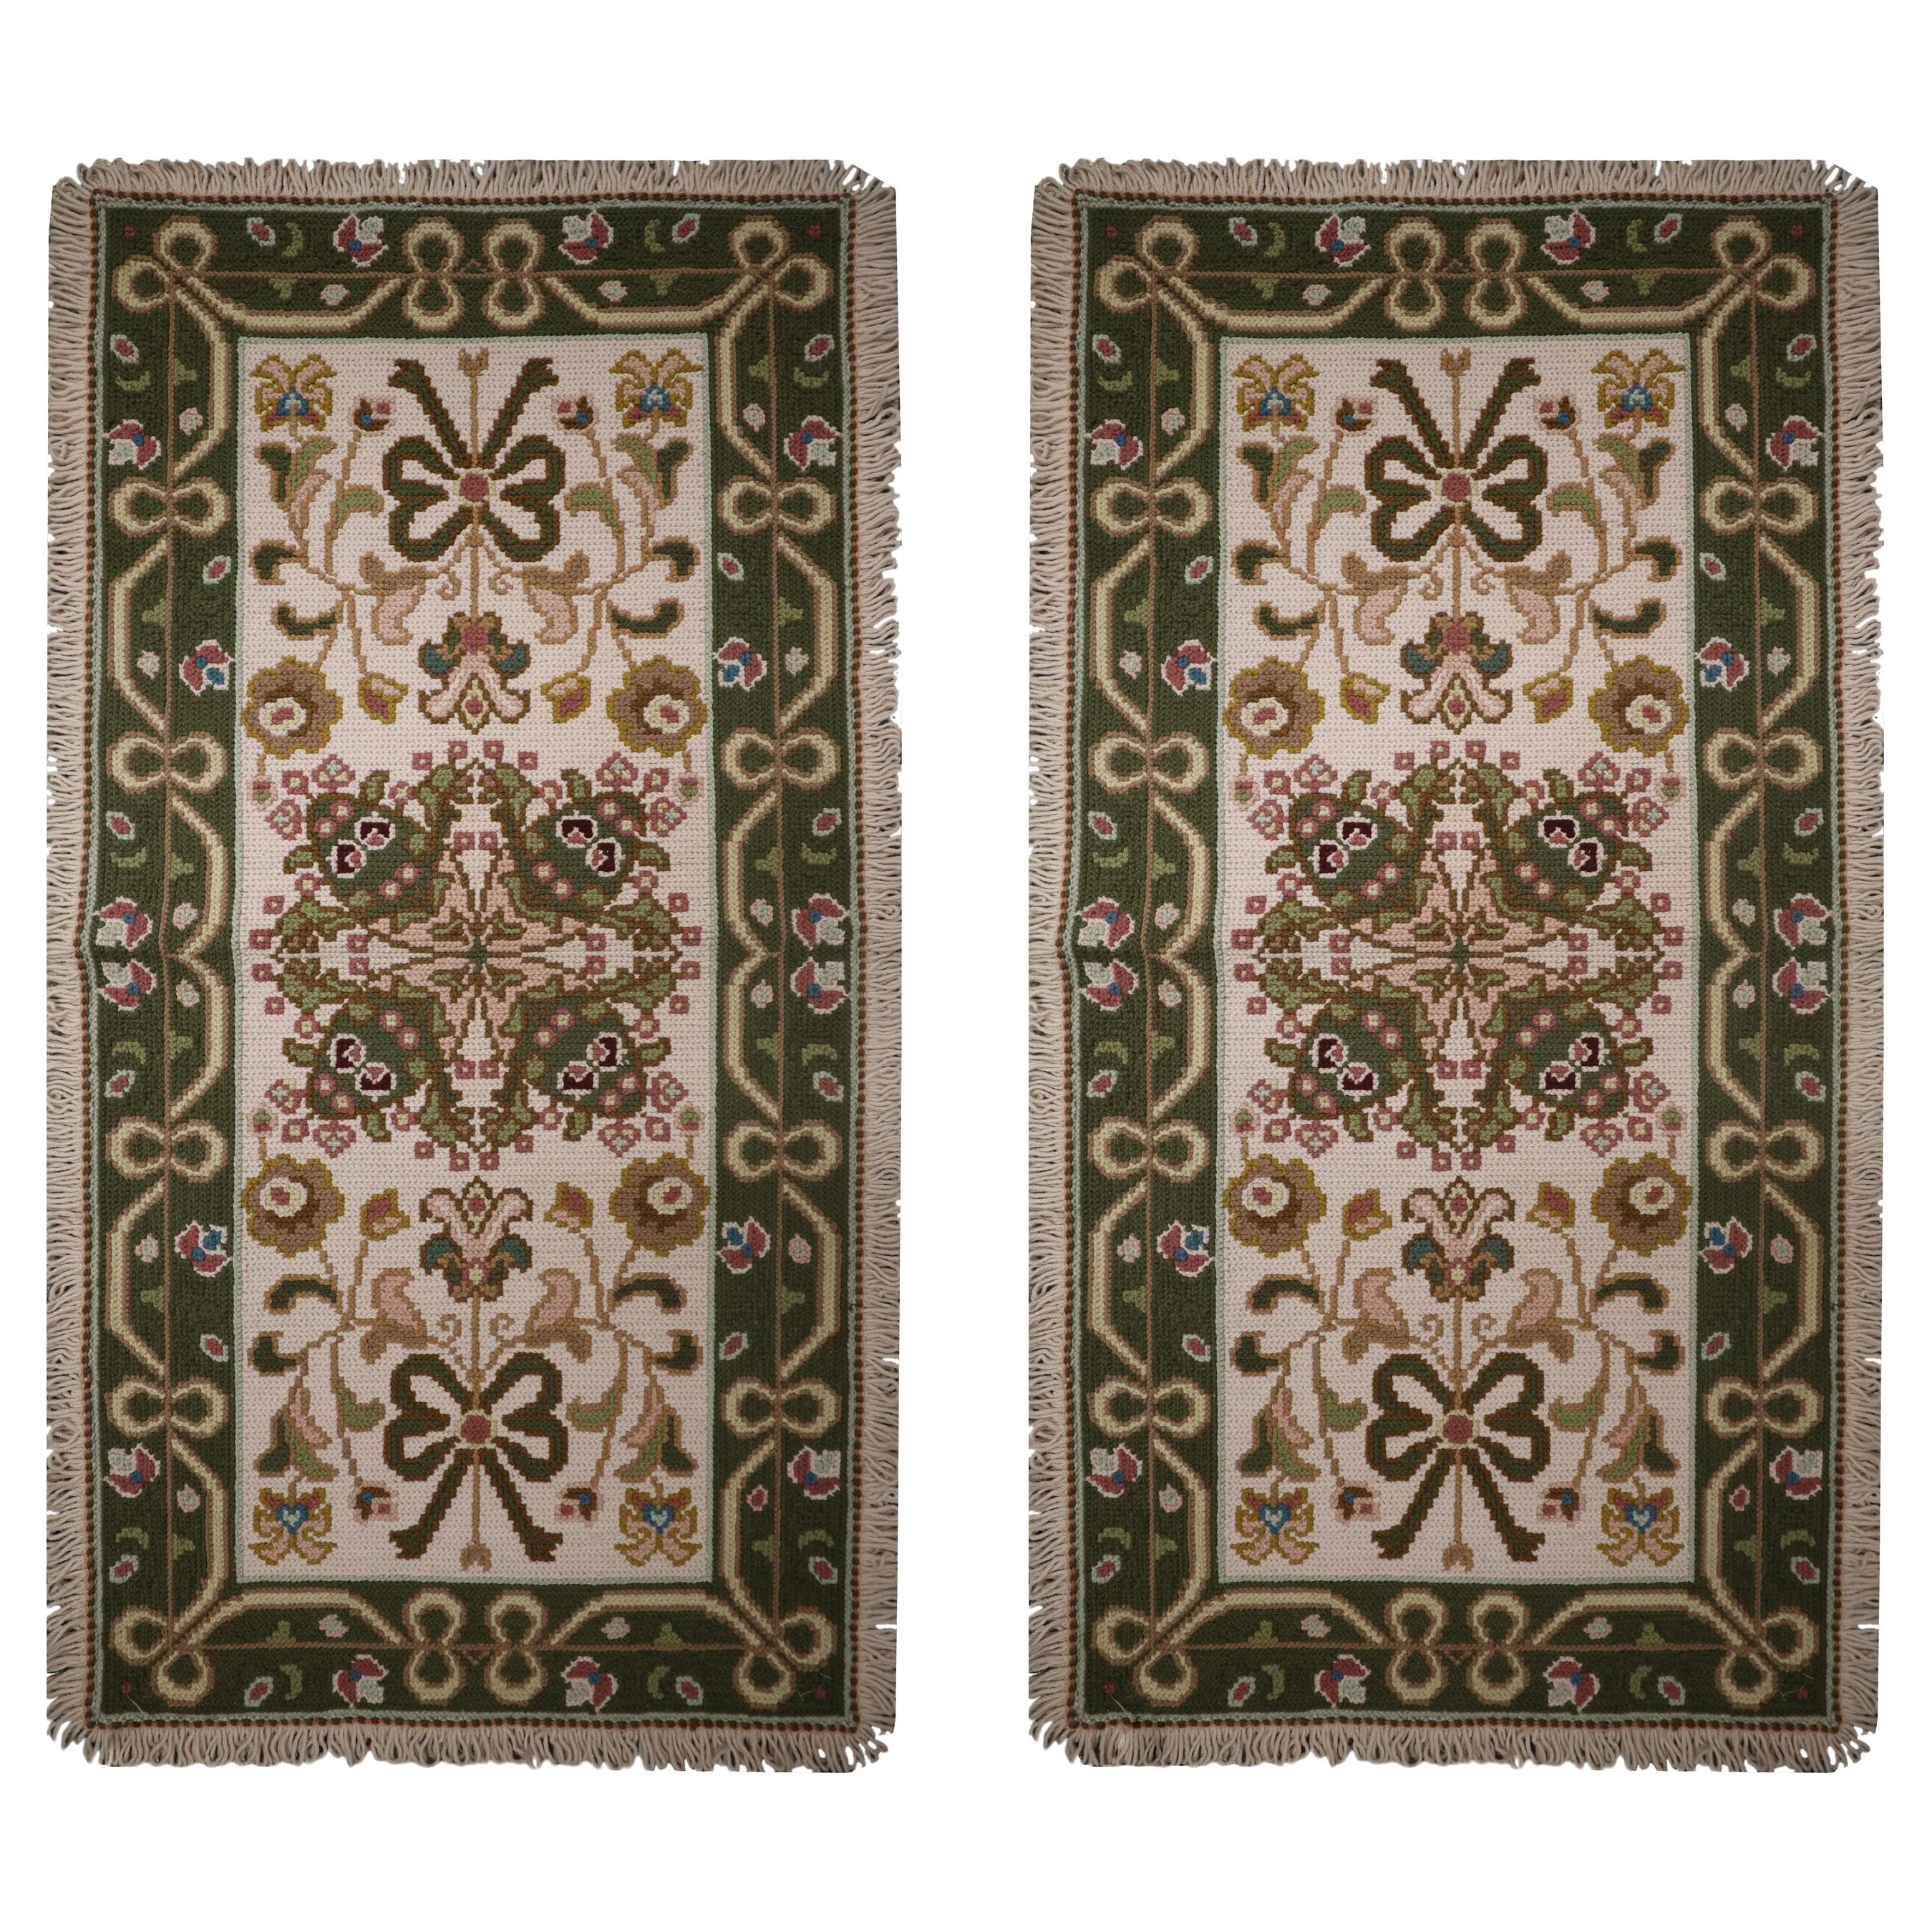 Pair of Handwoven Carpet Portuguese Needlepoint Rugs Wool Floral Rugs 65x135cm For Sale